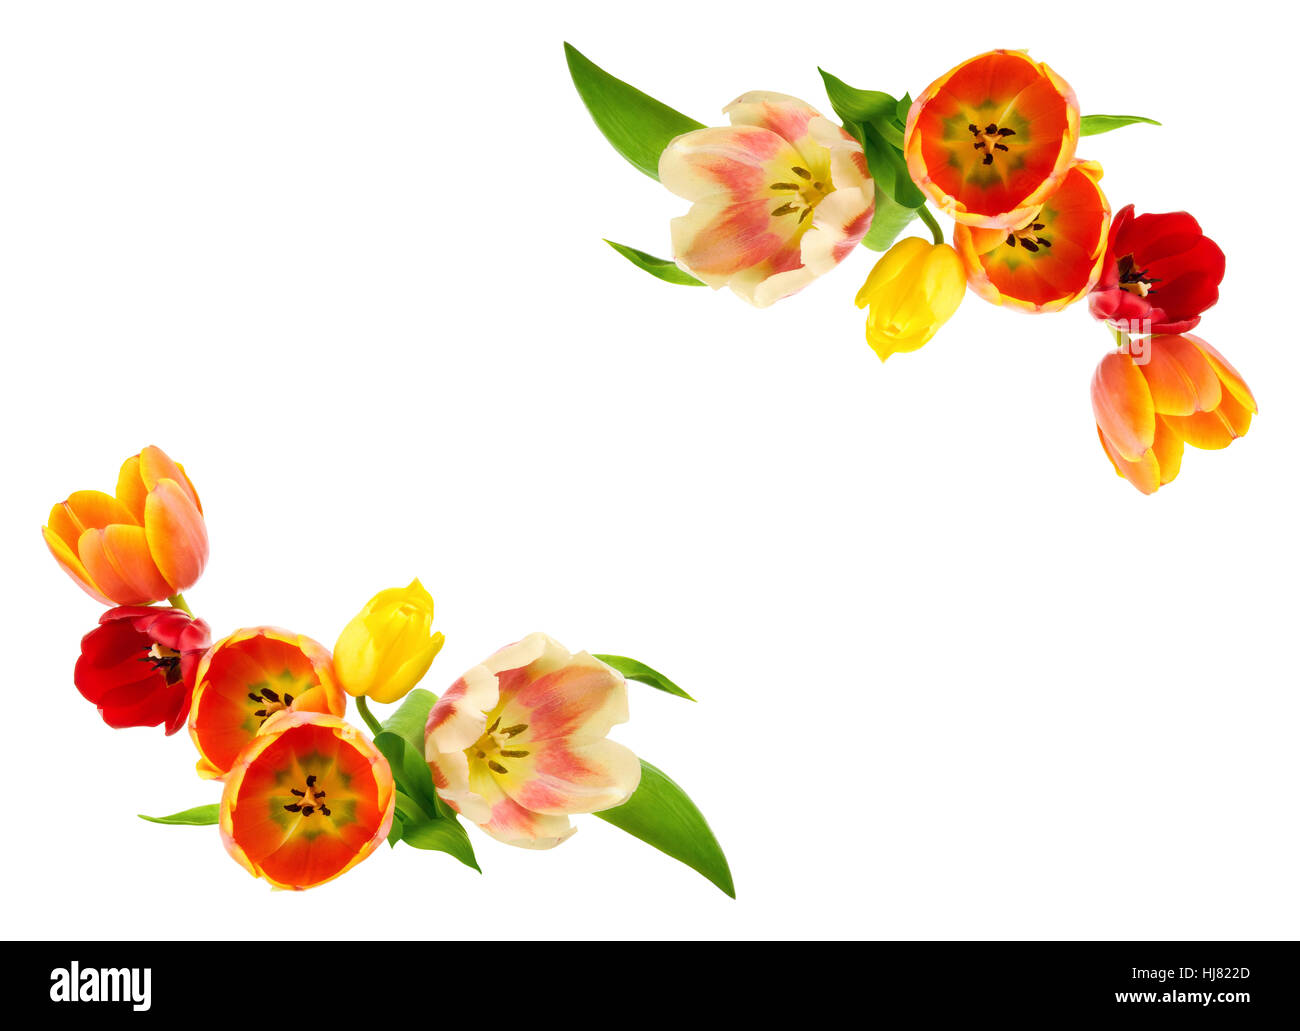 flower, flowers, plant, easter, spring, tulips, card, backdrop, background, Stock Photo